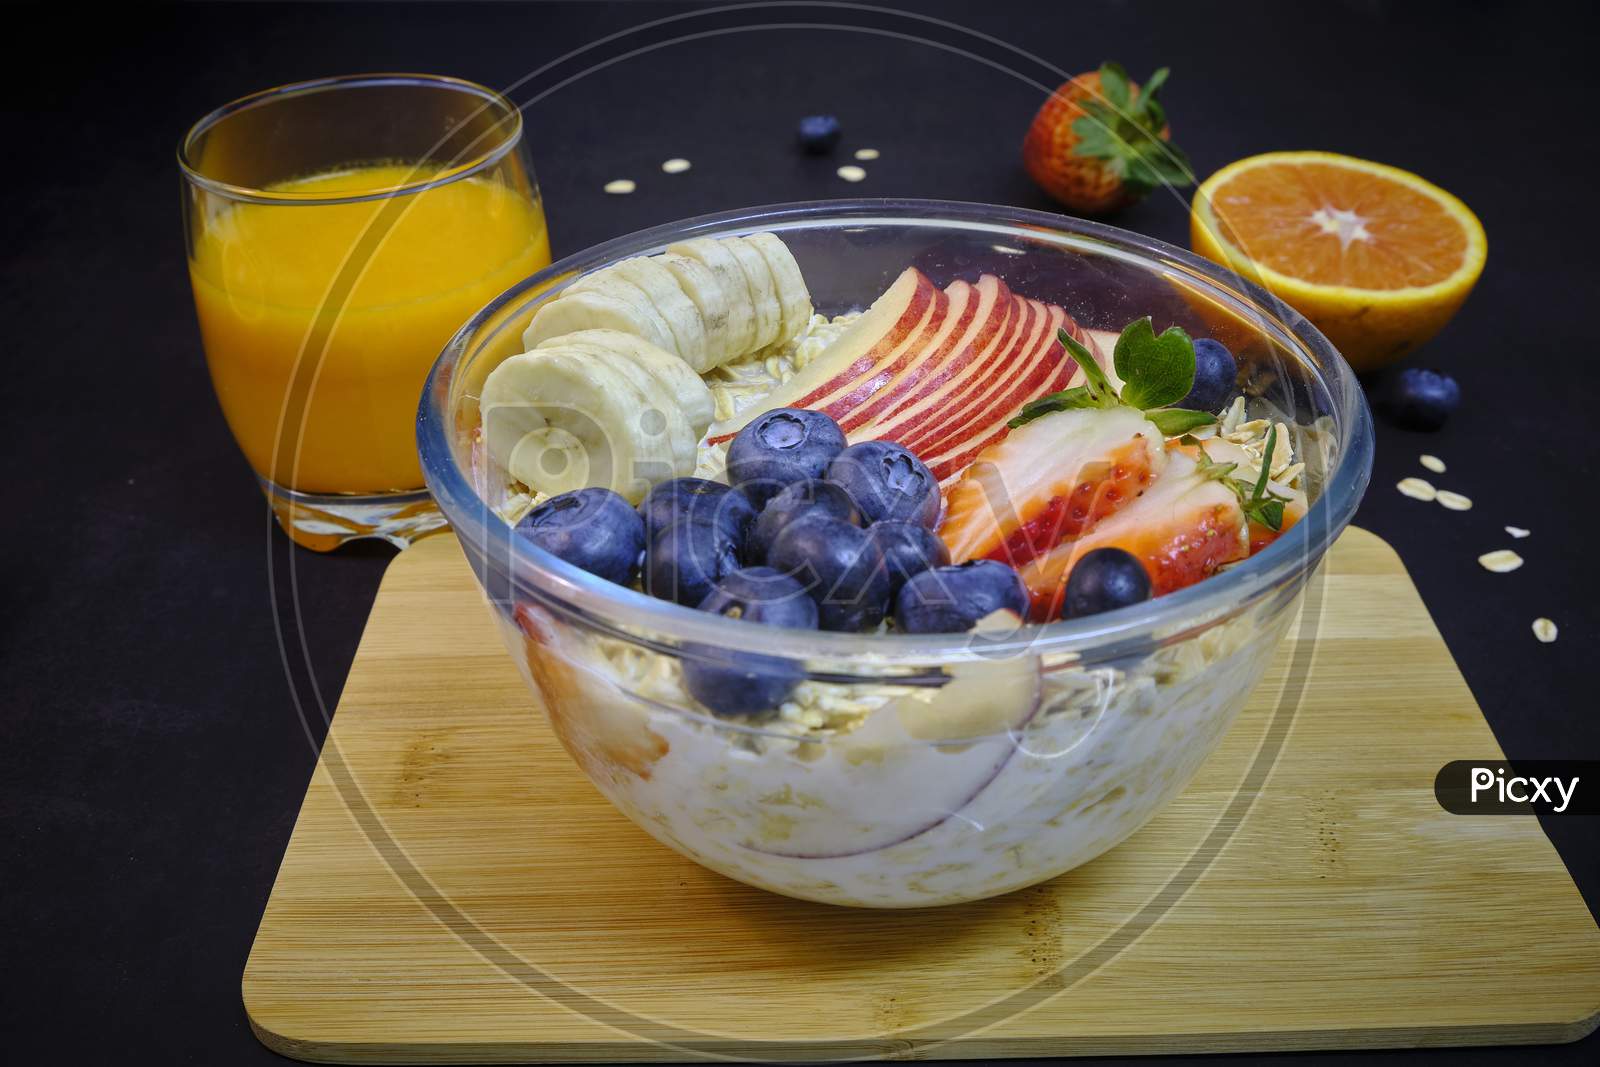 Healthy Breakfast With Fresh Fruits. Bowl Of Colorful Fruits And Oats.